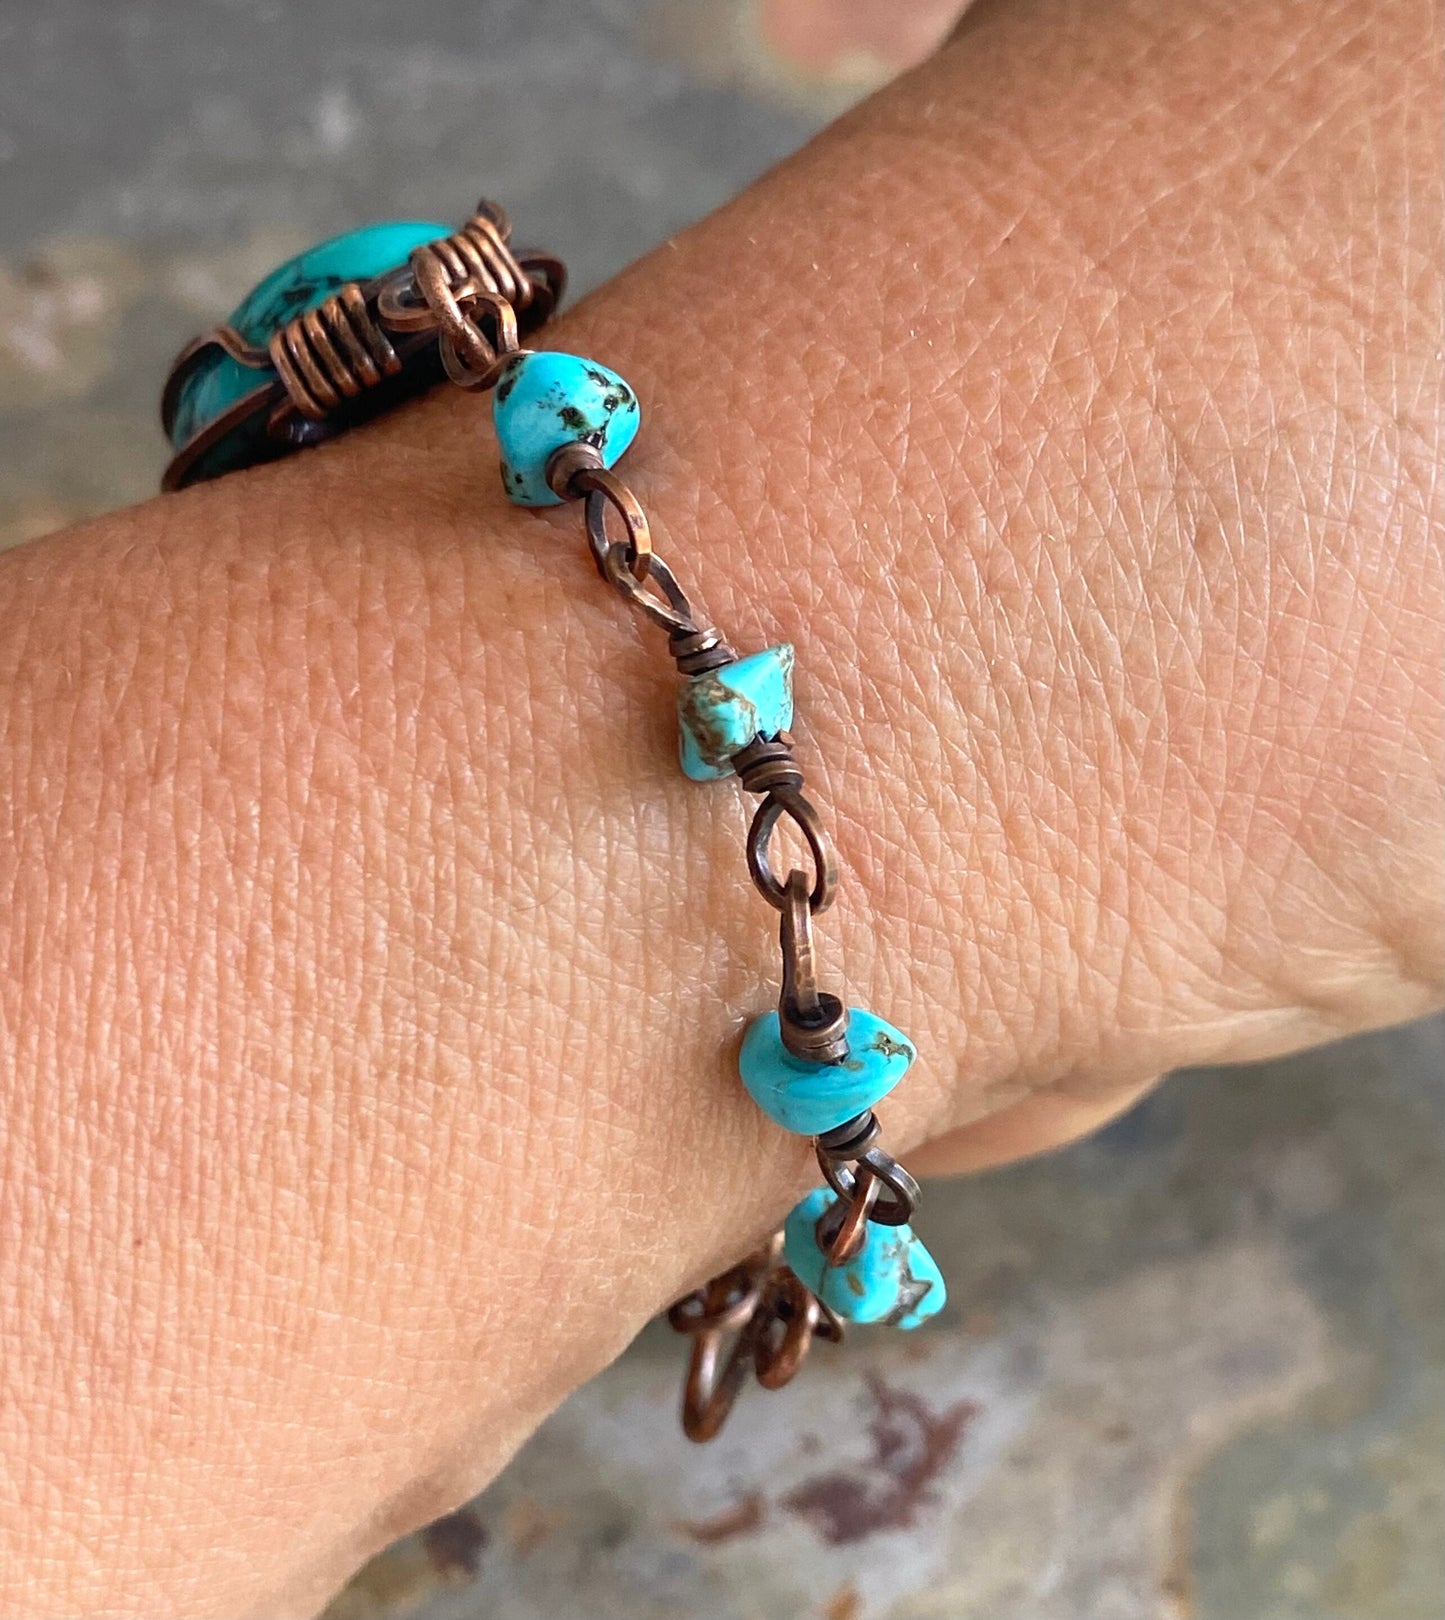 Turquoise Cuff Bracelet,Wire Wrapped Blue Howlite Turquoise Bracelet, Turquoise Adjustable Cuff Bracelet, Turquoise Bangle Bracelet